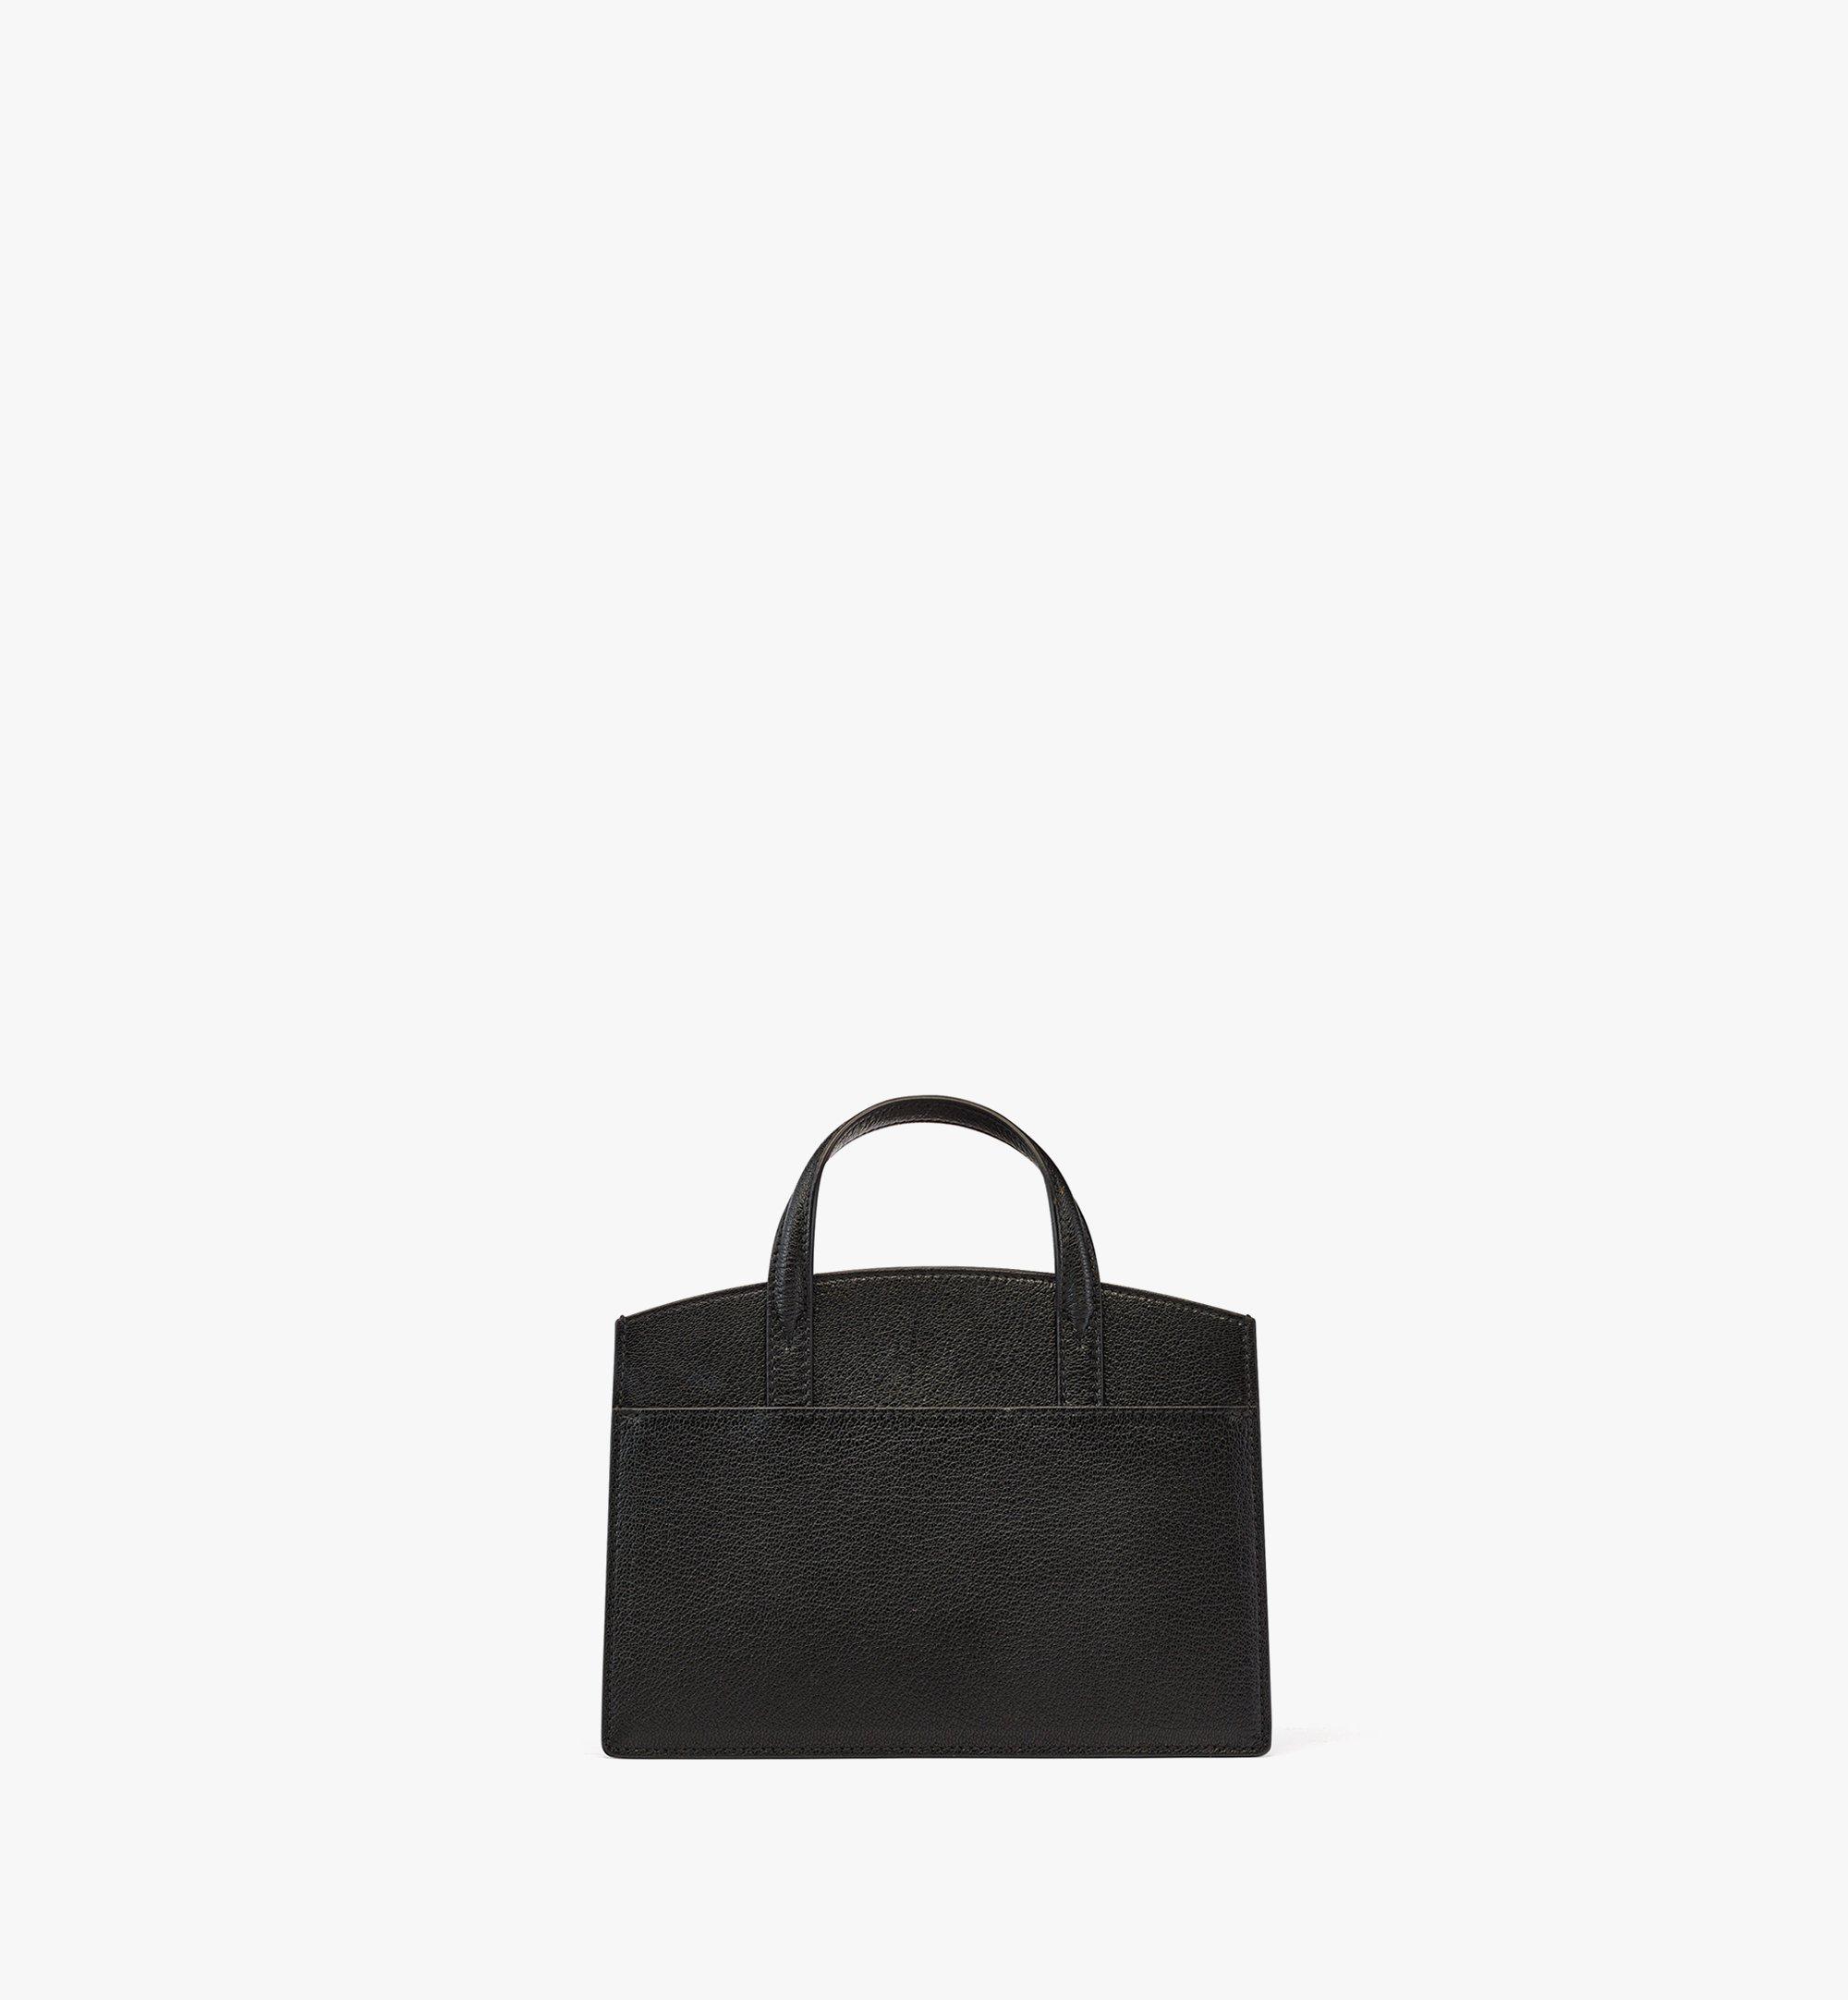 MCM Upcycling Project Jewelry Milano Tote in Goatskin Leather Black MWTCSUP04BK001 Alternate View 3